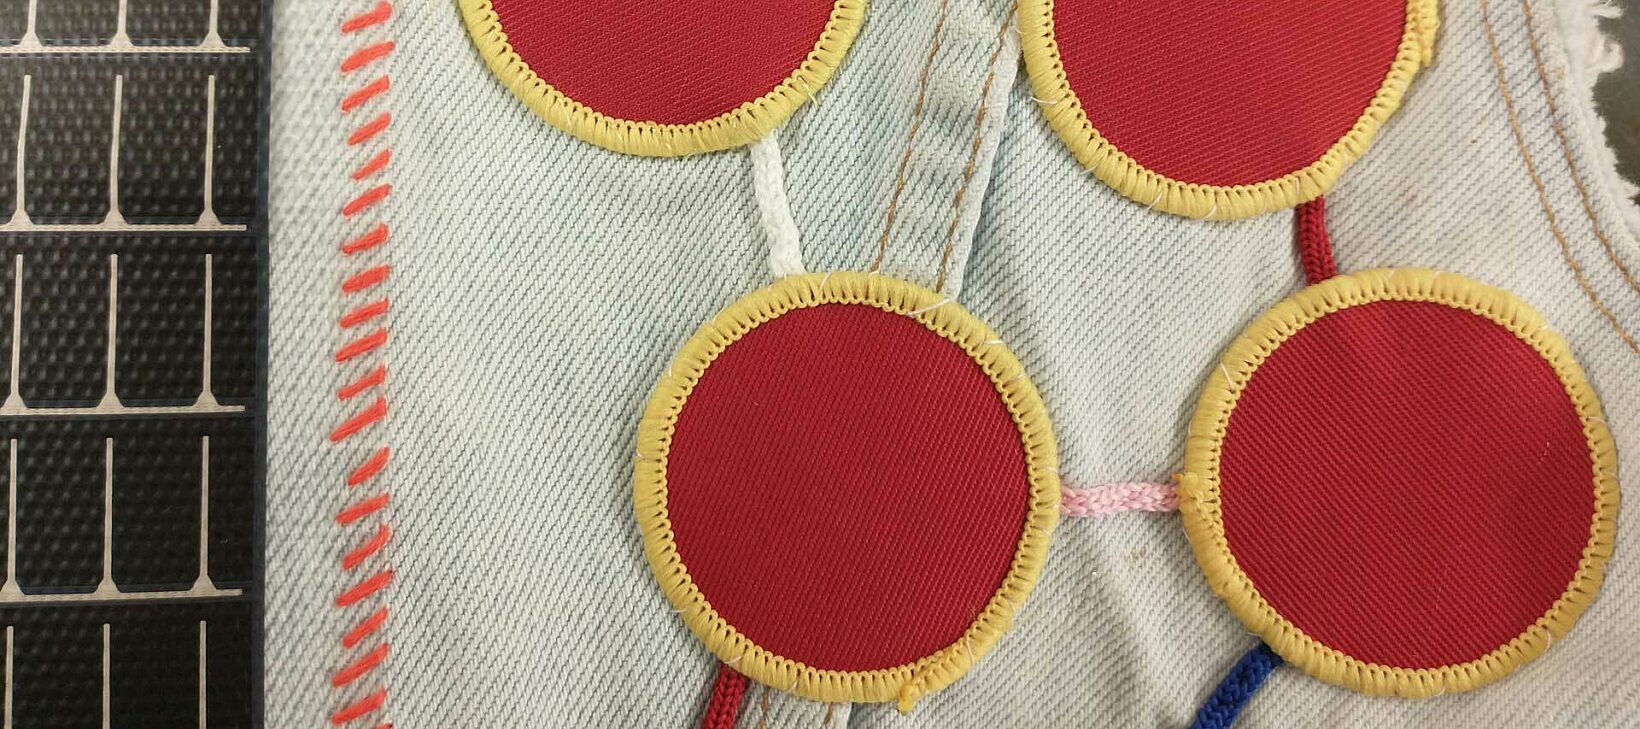 A close up of a jacket that contains various patches and stitches. The primary pattern is four red circles with yellow rims, attached in a network style.